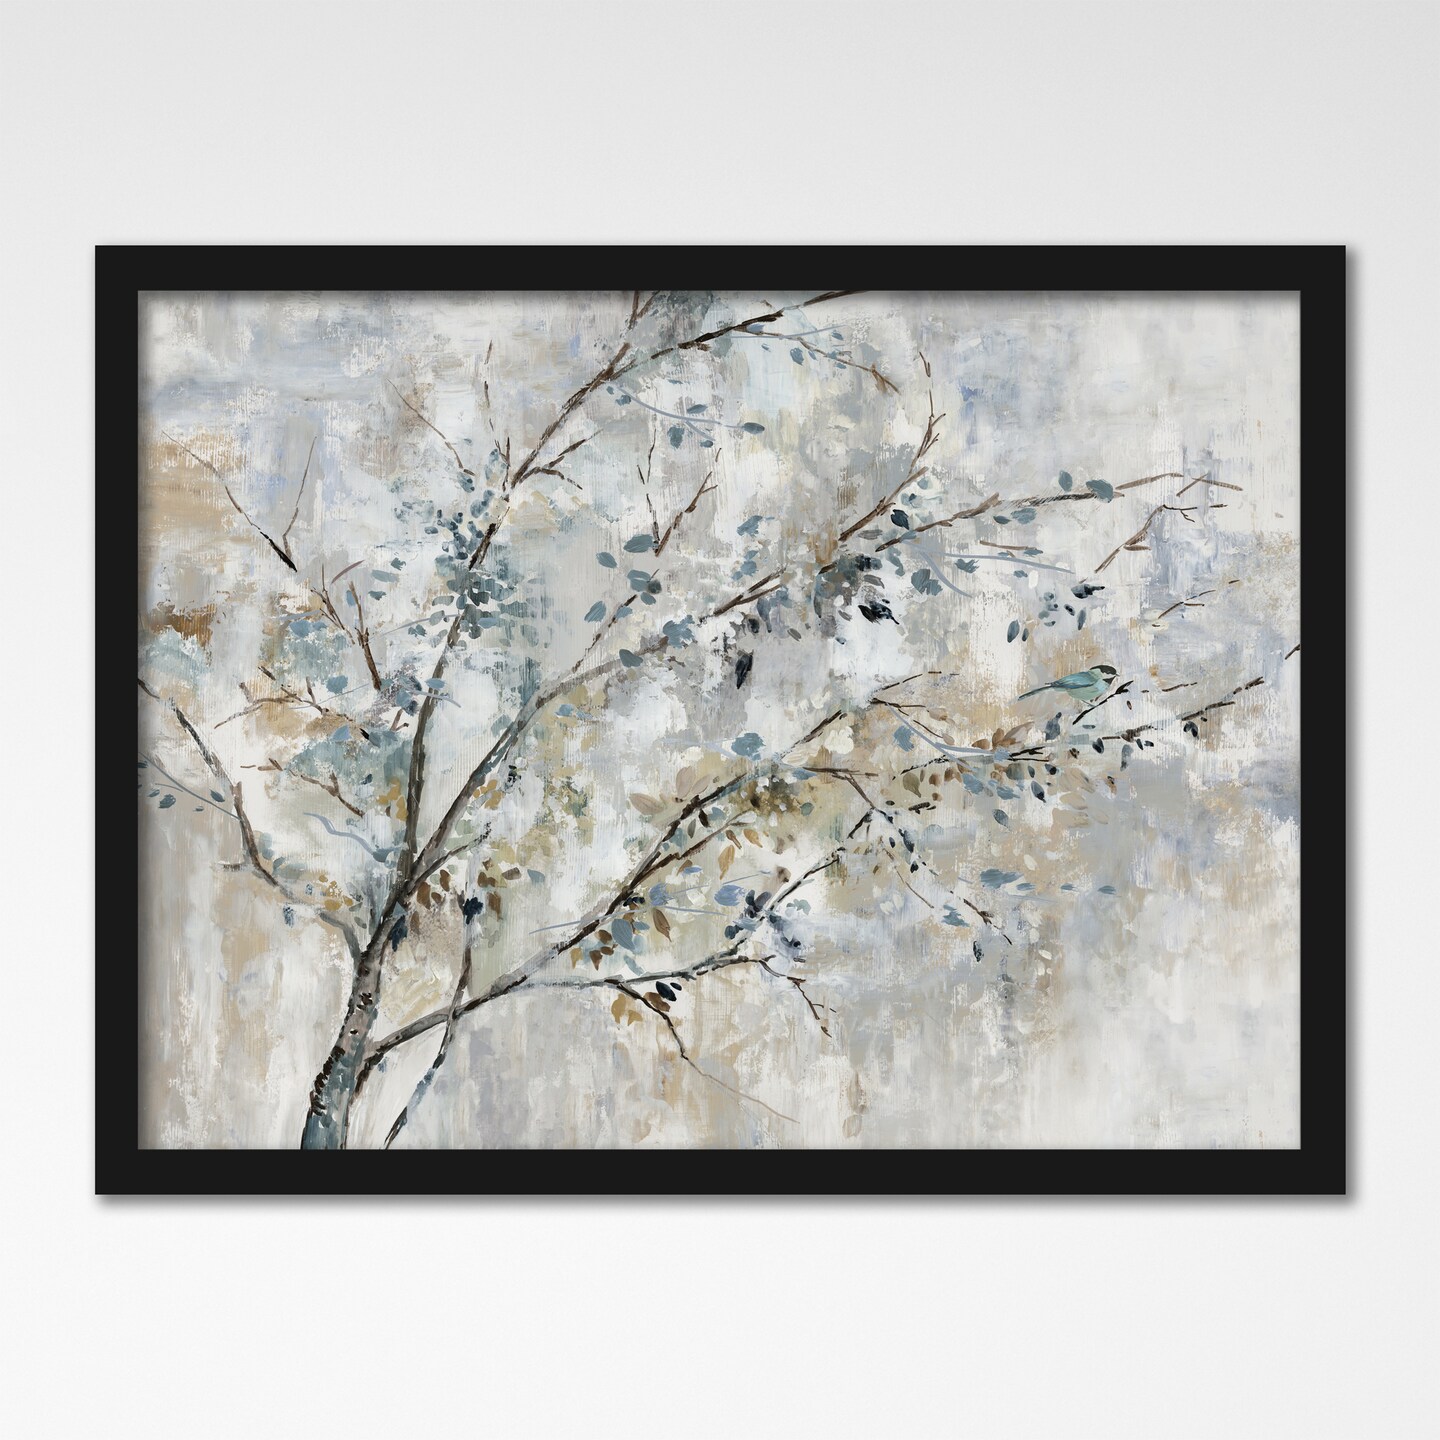 Feathered Serenade Amongst Leaves by PI Creative Art  Framed Print - Americanflat